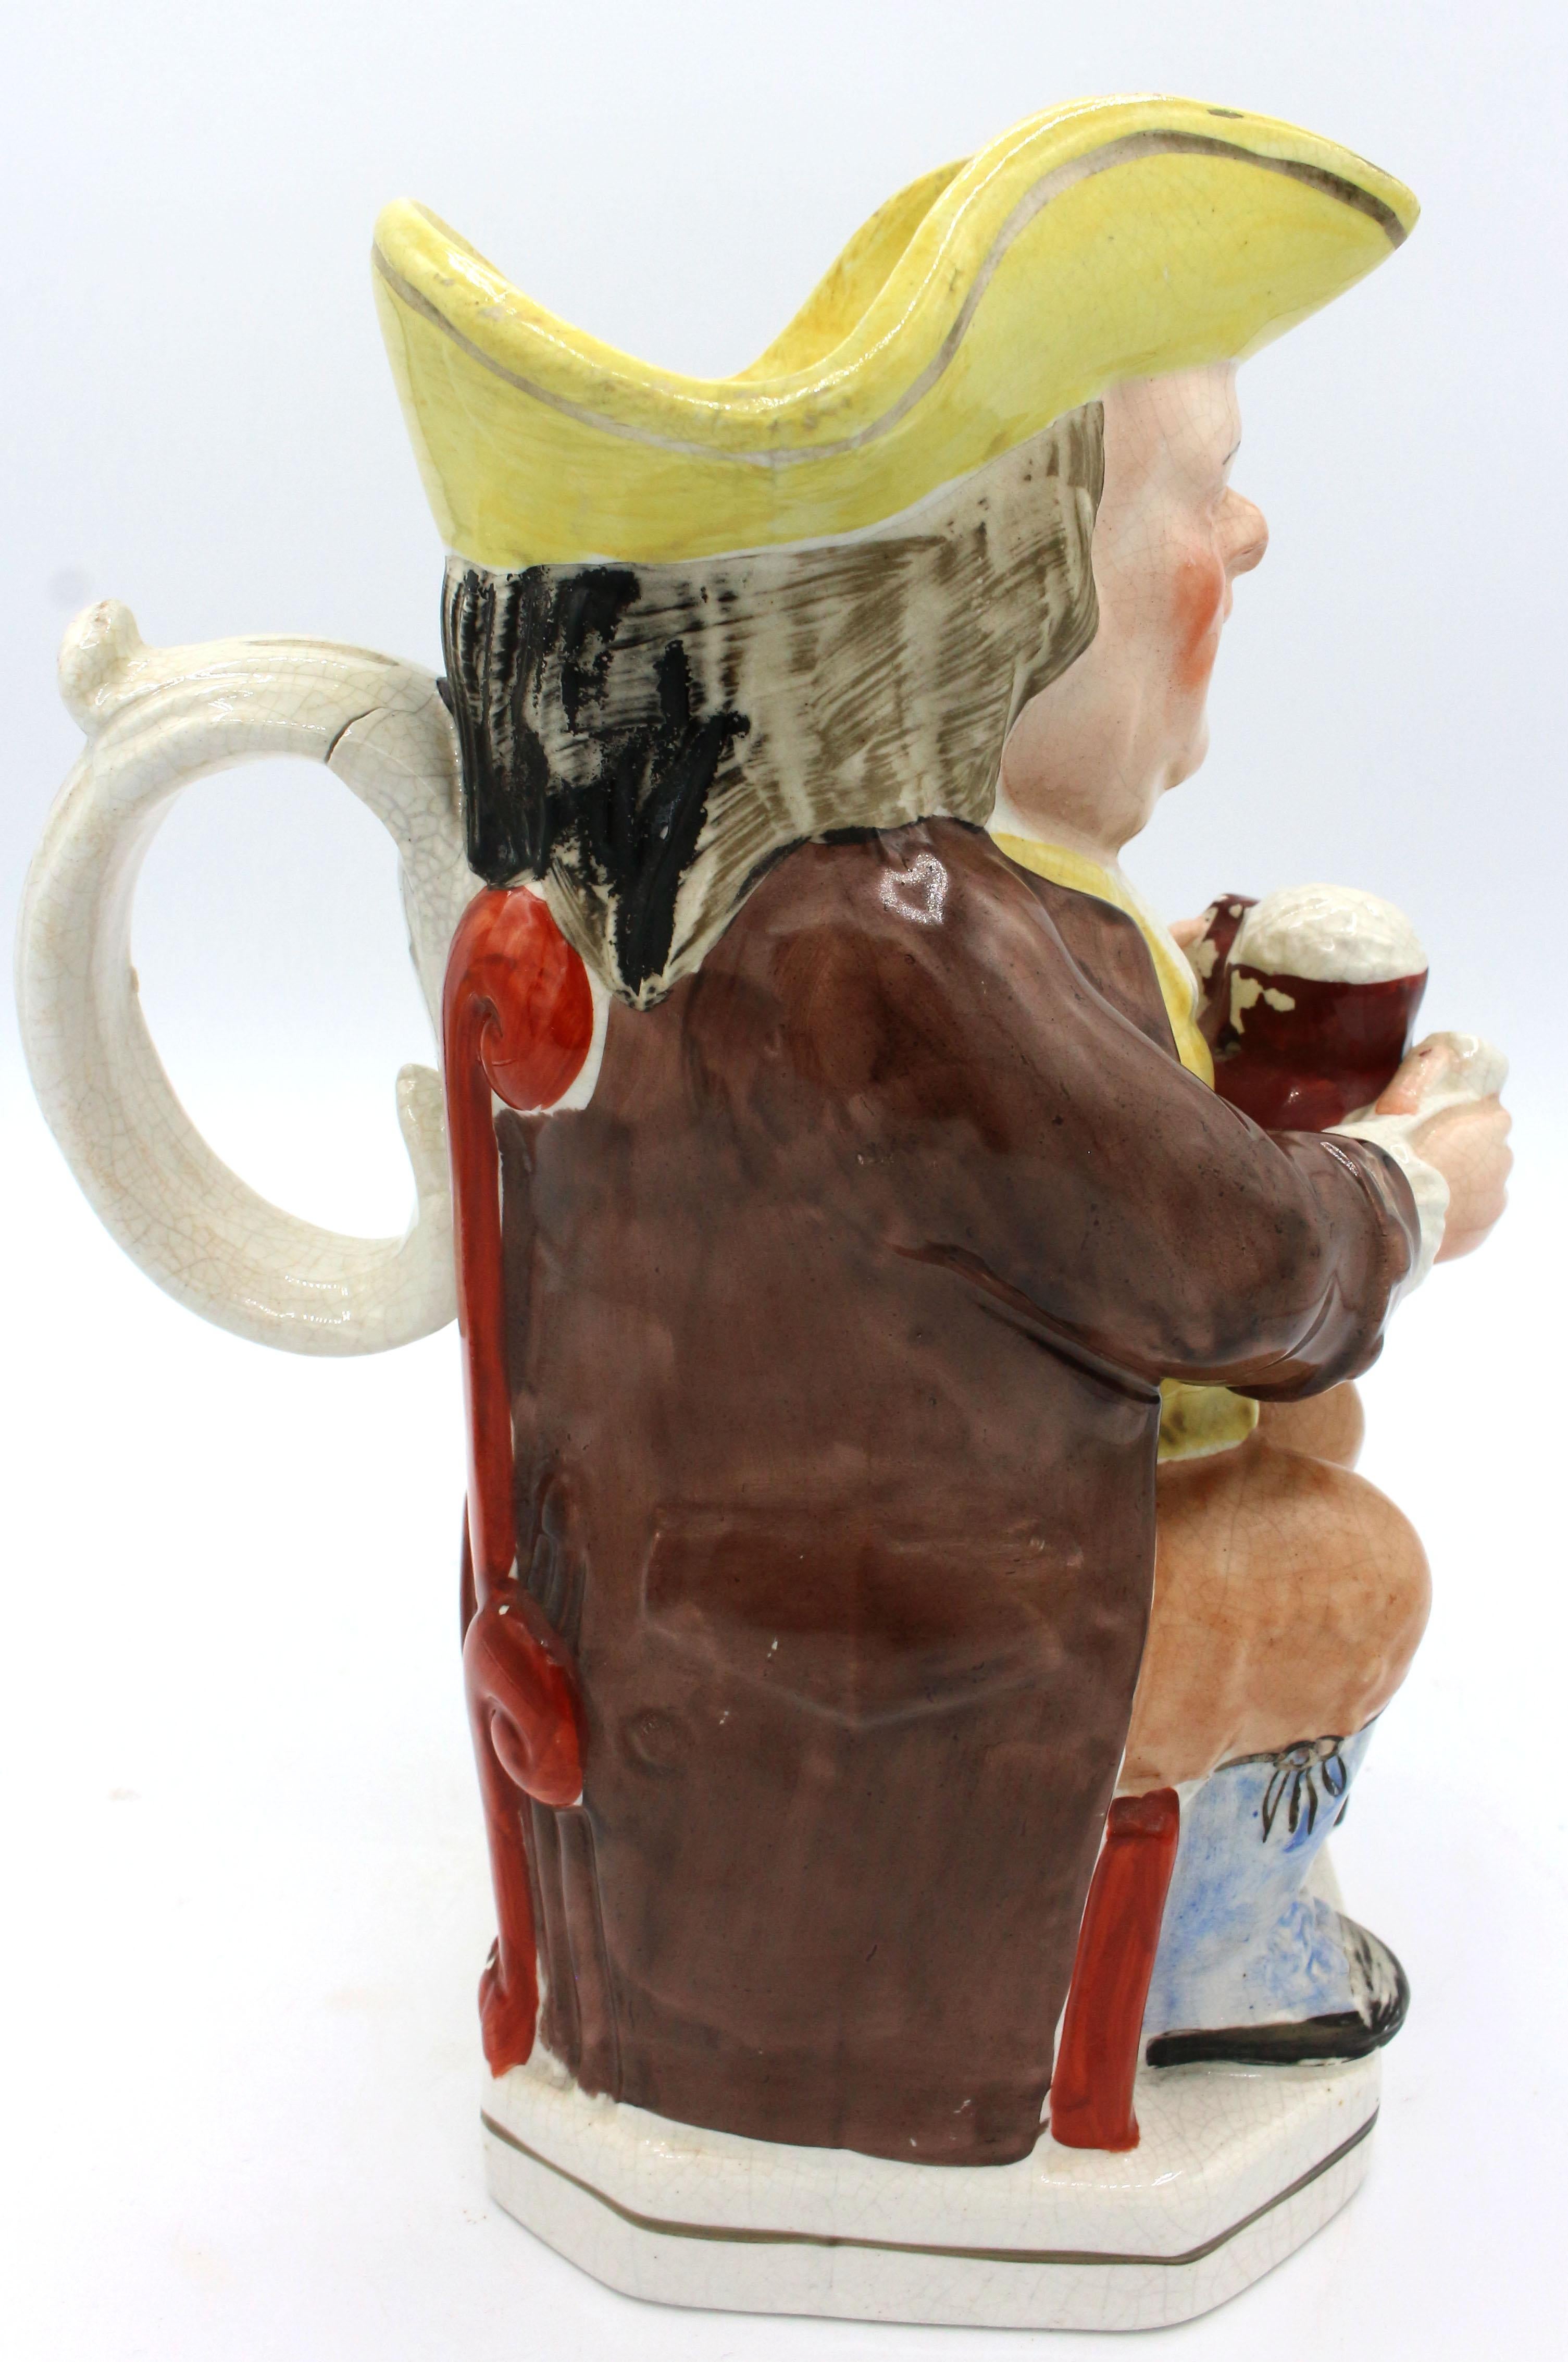 The Drunken Parson with white clerical collar Toby Jug, England, circa 1880s. Staffordshire. Crackle glaze & firing flaw in handle. He holds a frothy mug & a pipe.
10